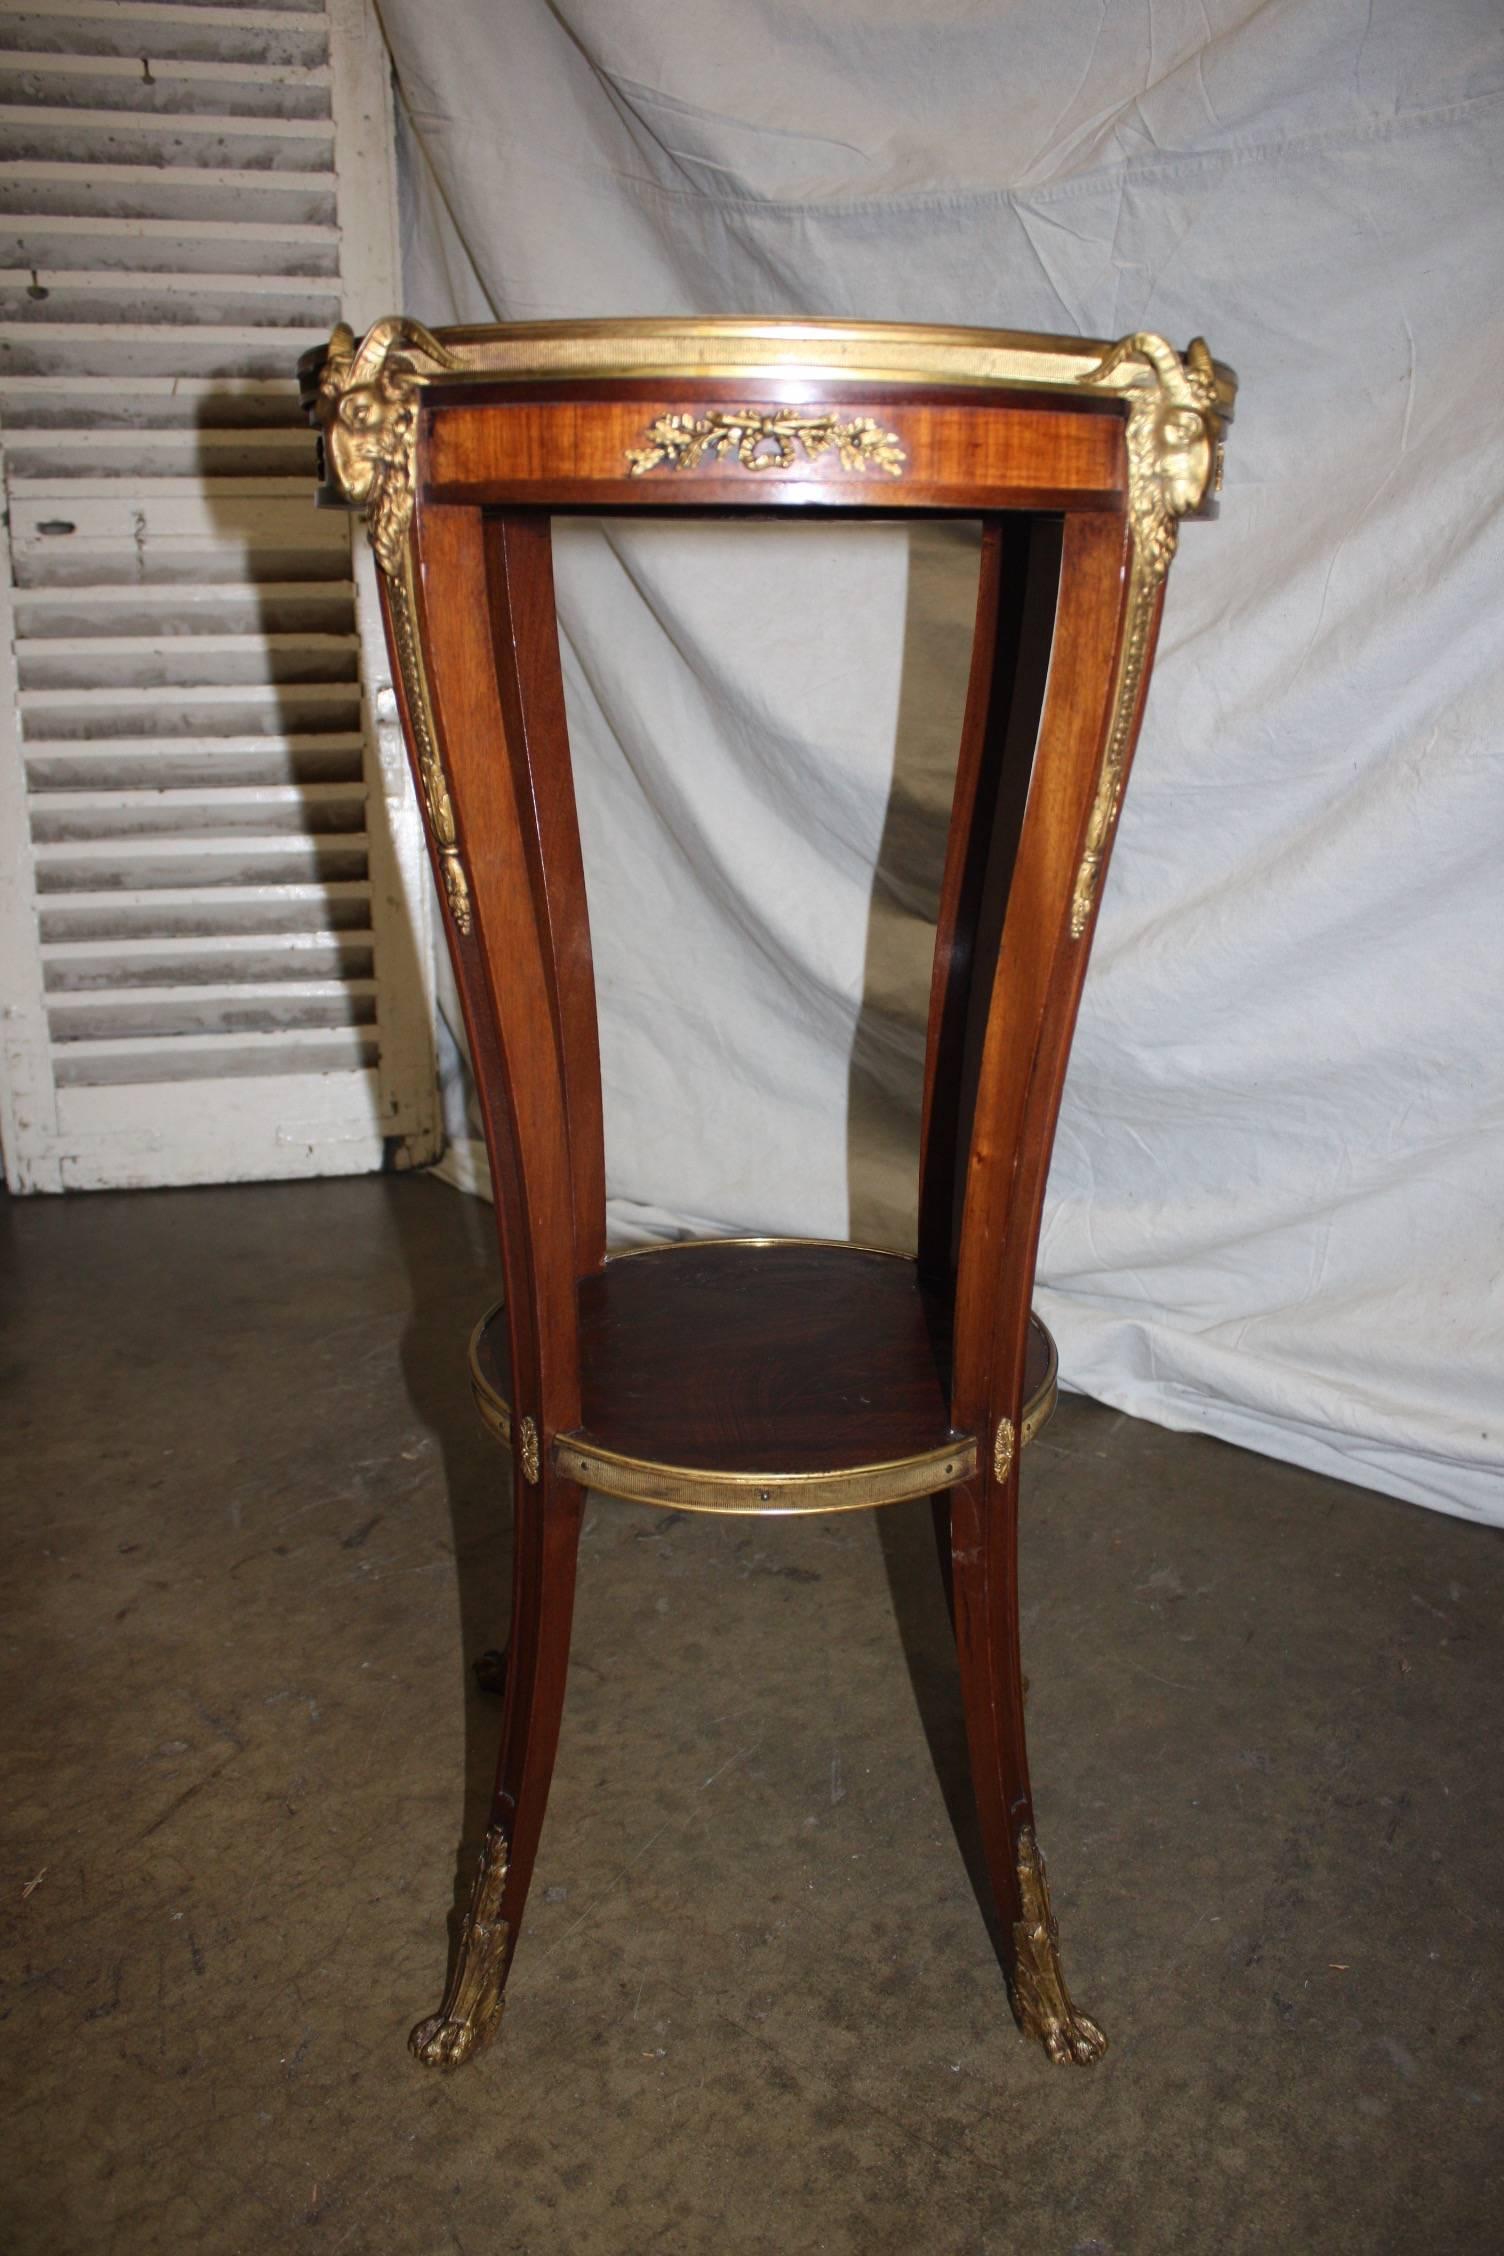 Superb 19th Century French Gueridon In Excellent Condition For Sale In Stockbridge, GA